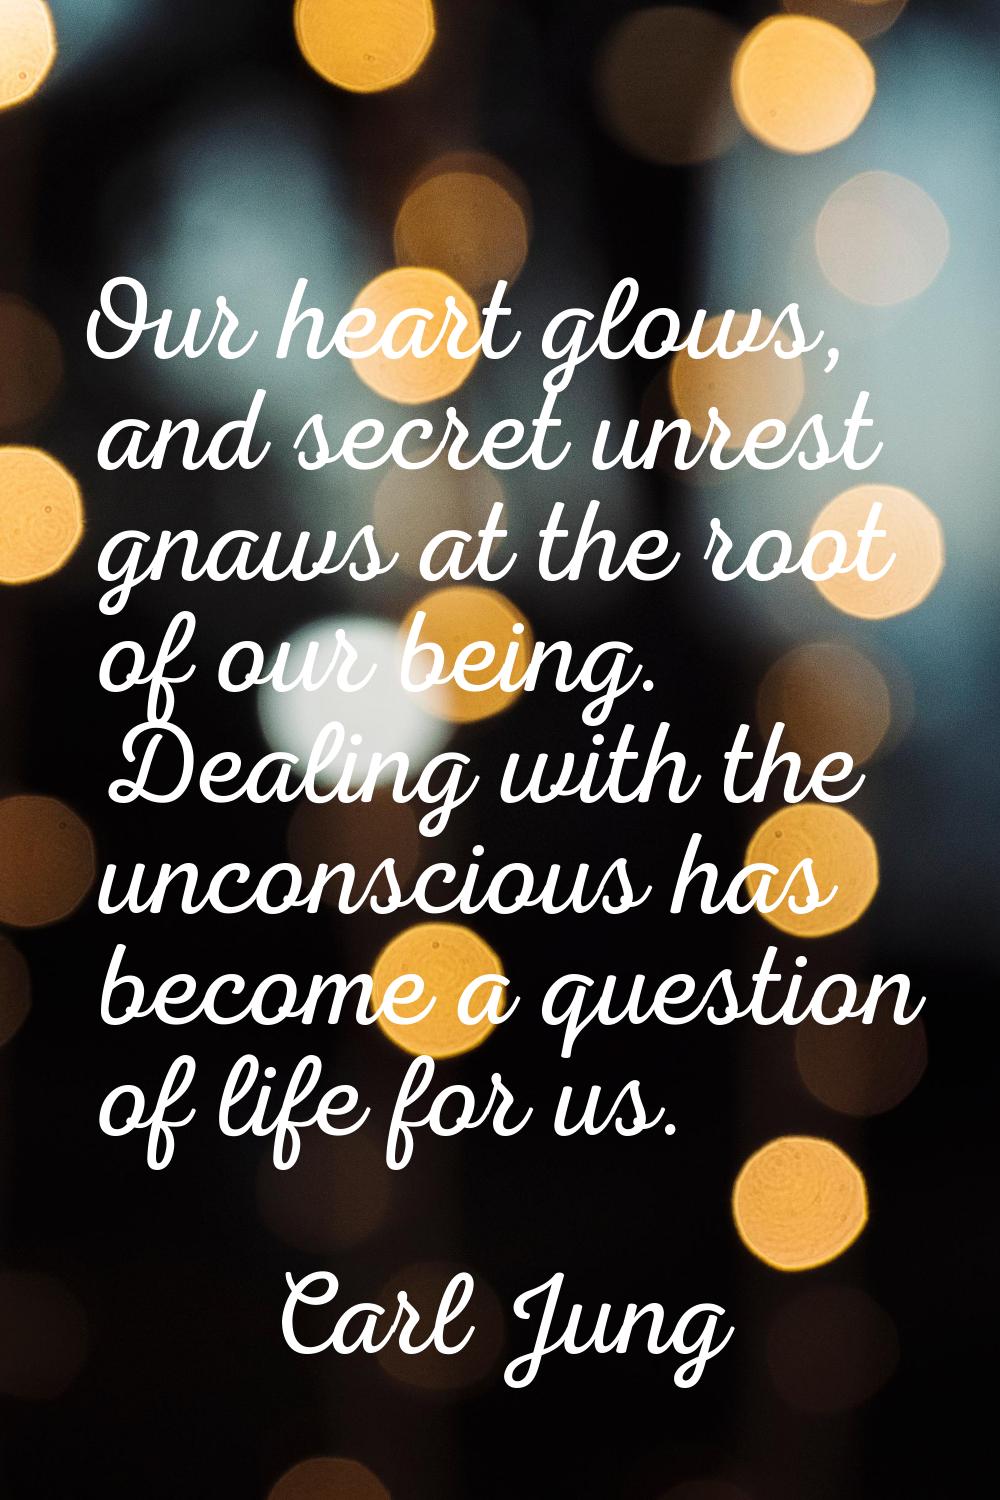 Our heart glows, and secret unrest gnaws at the root of our being. Dealing with the unconscious has